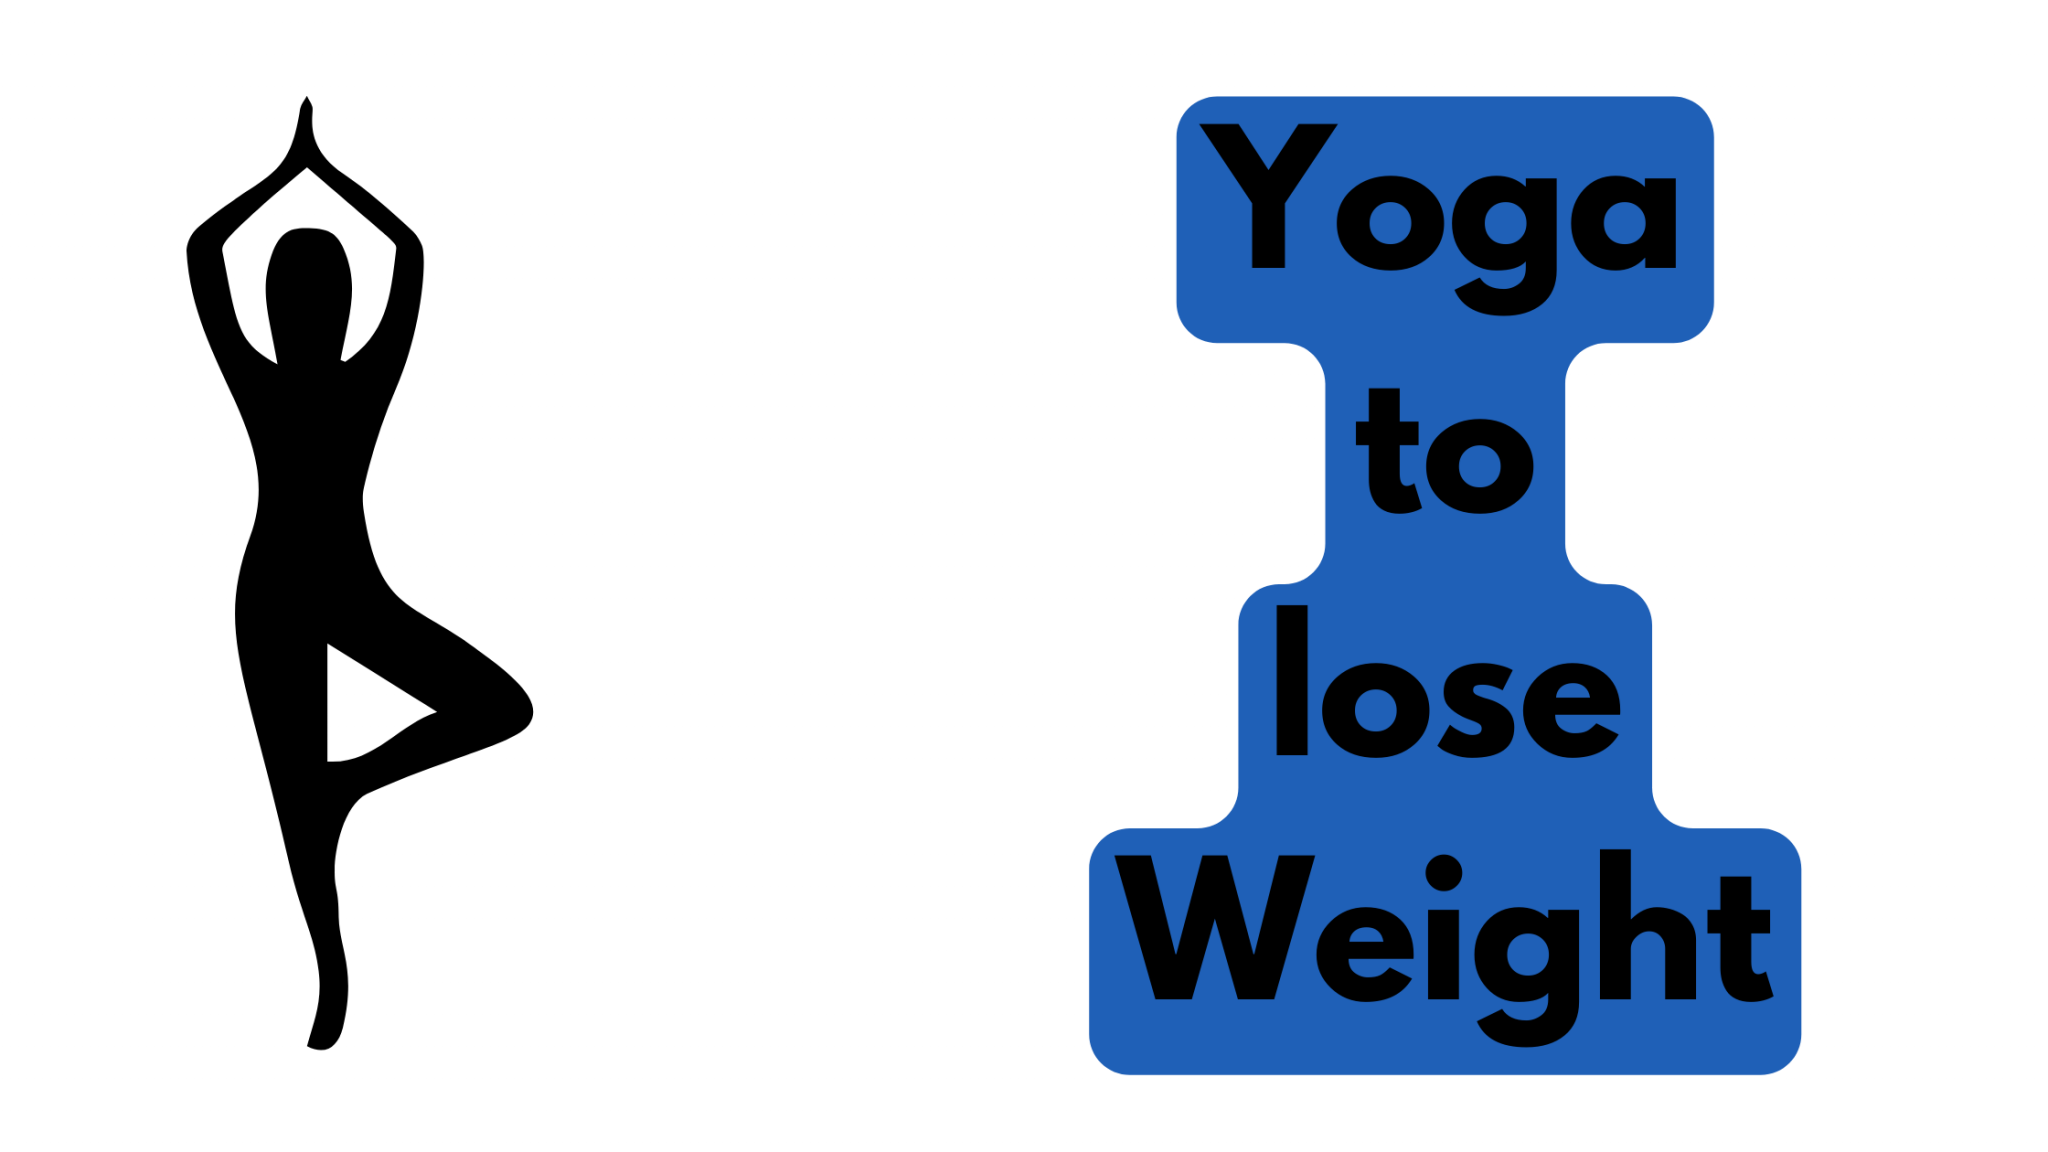 Yoga to lose weight